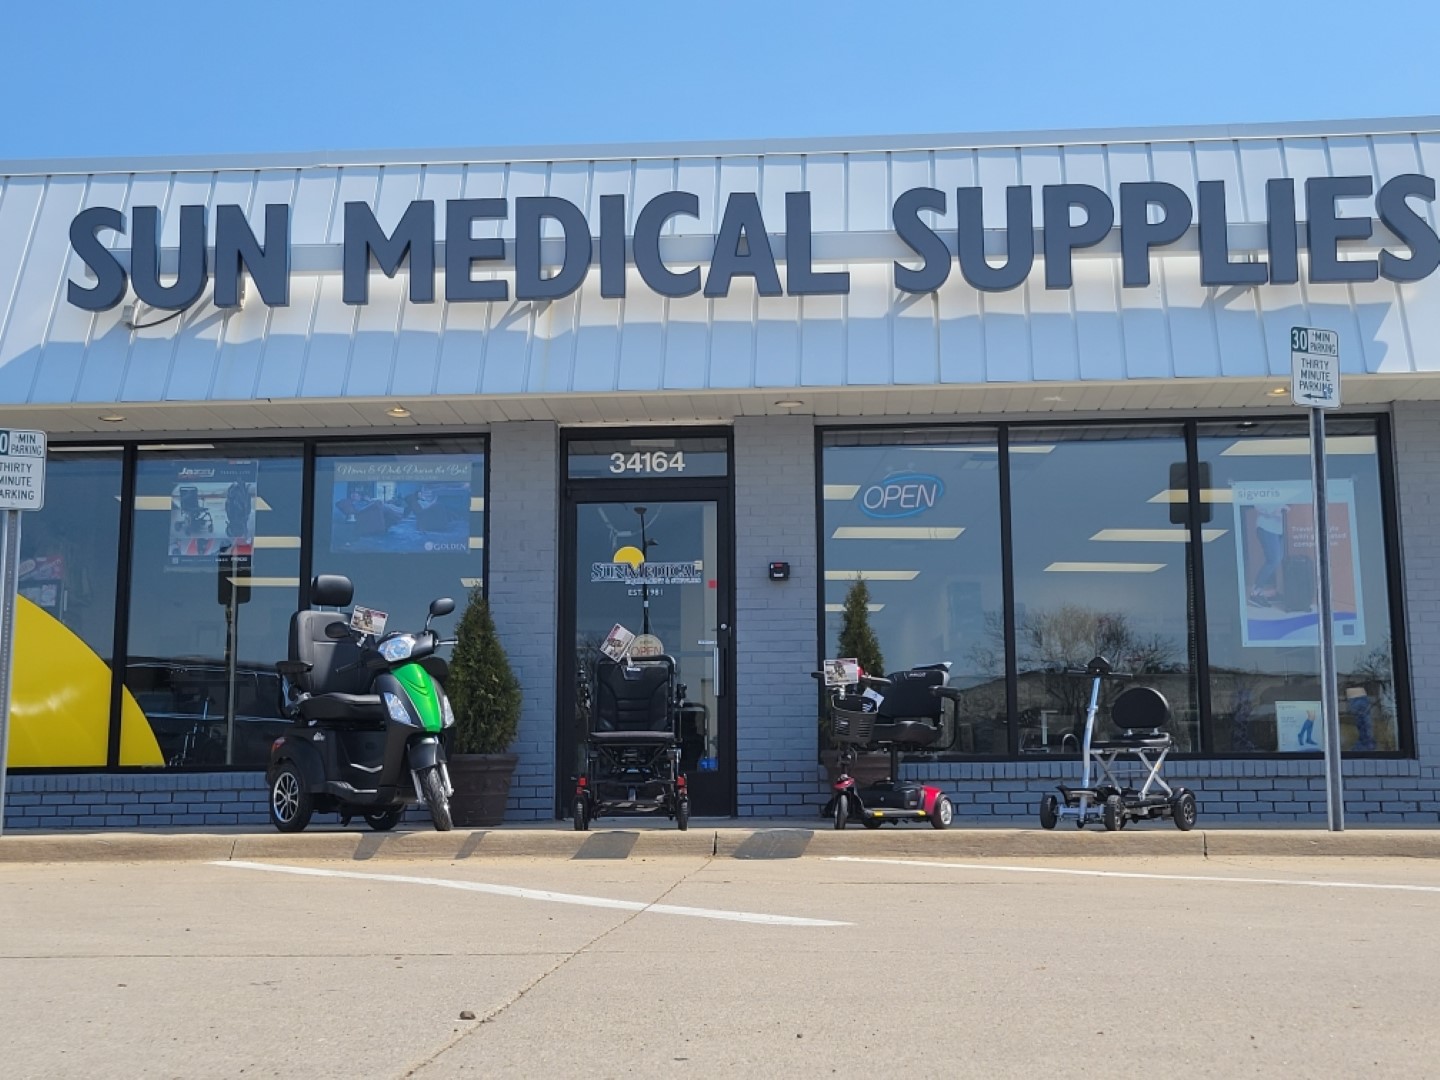 Sun Medical Supplies mobility scooters outside of store